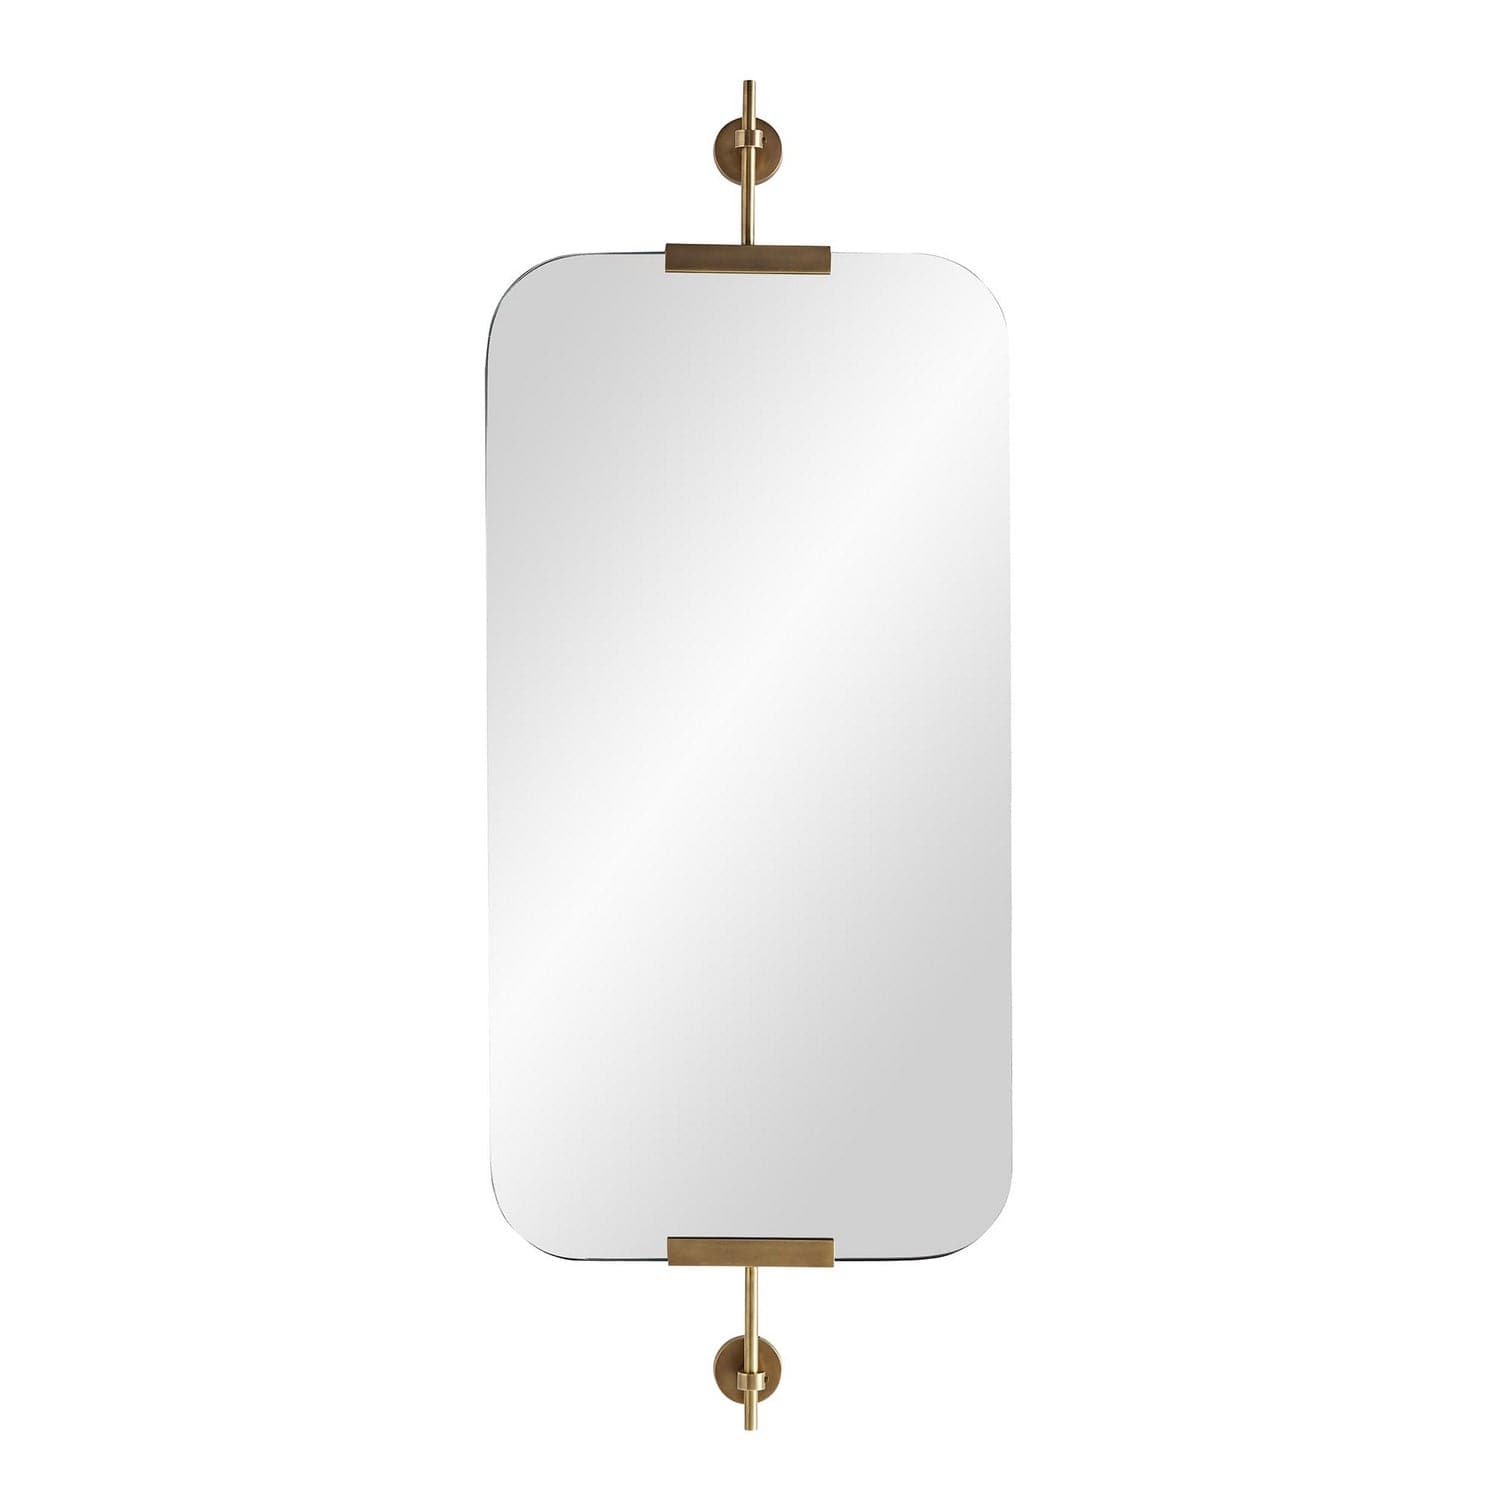 Mirror from the Madden collection in Antique Brass finish